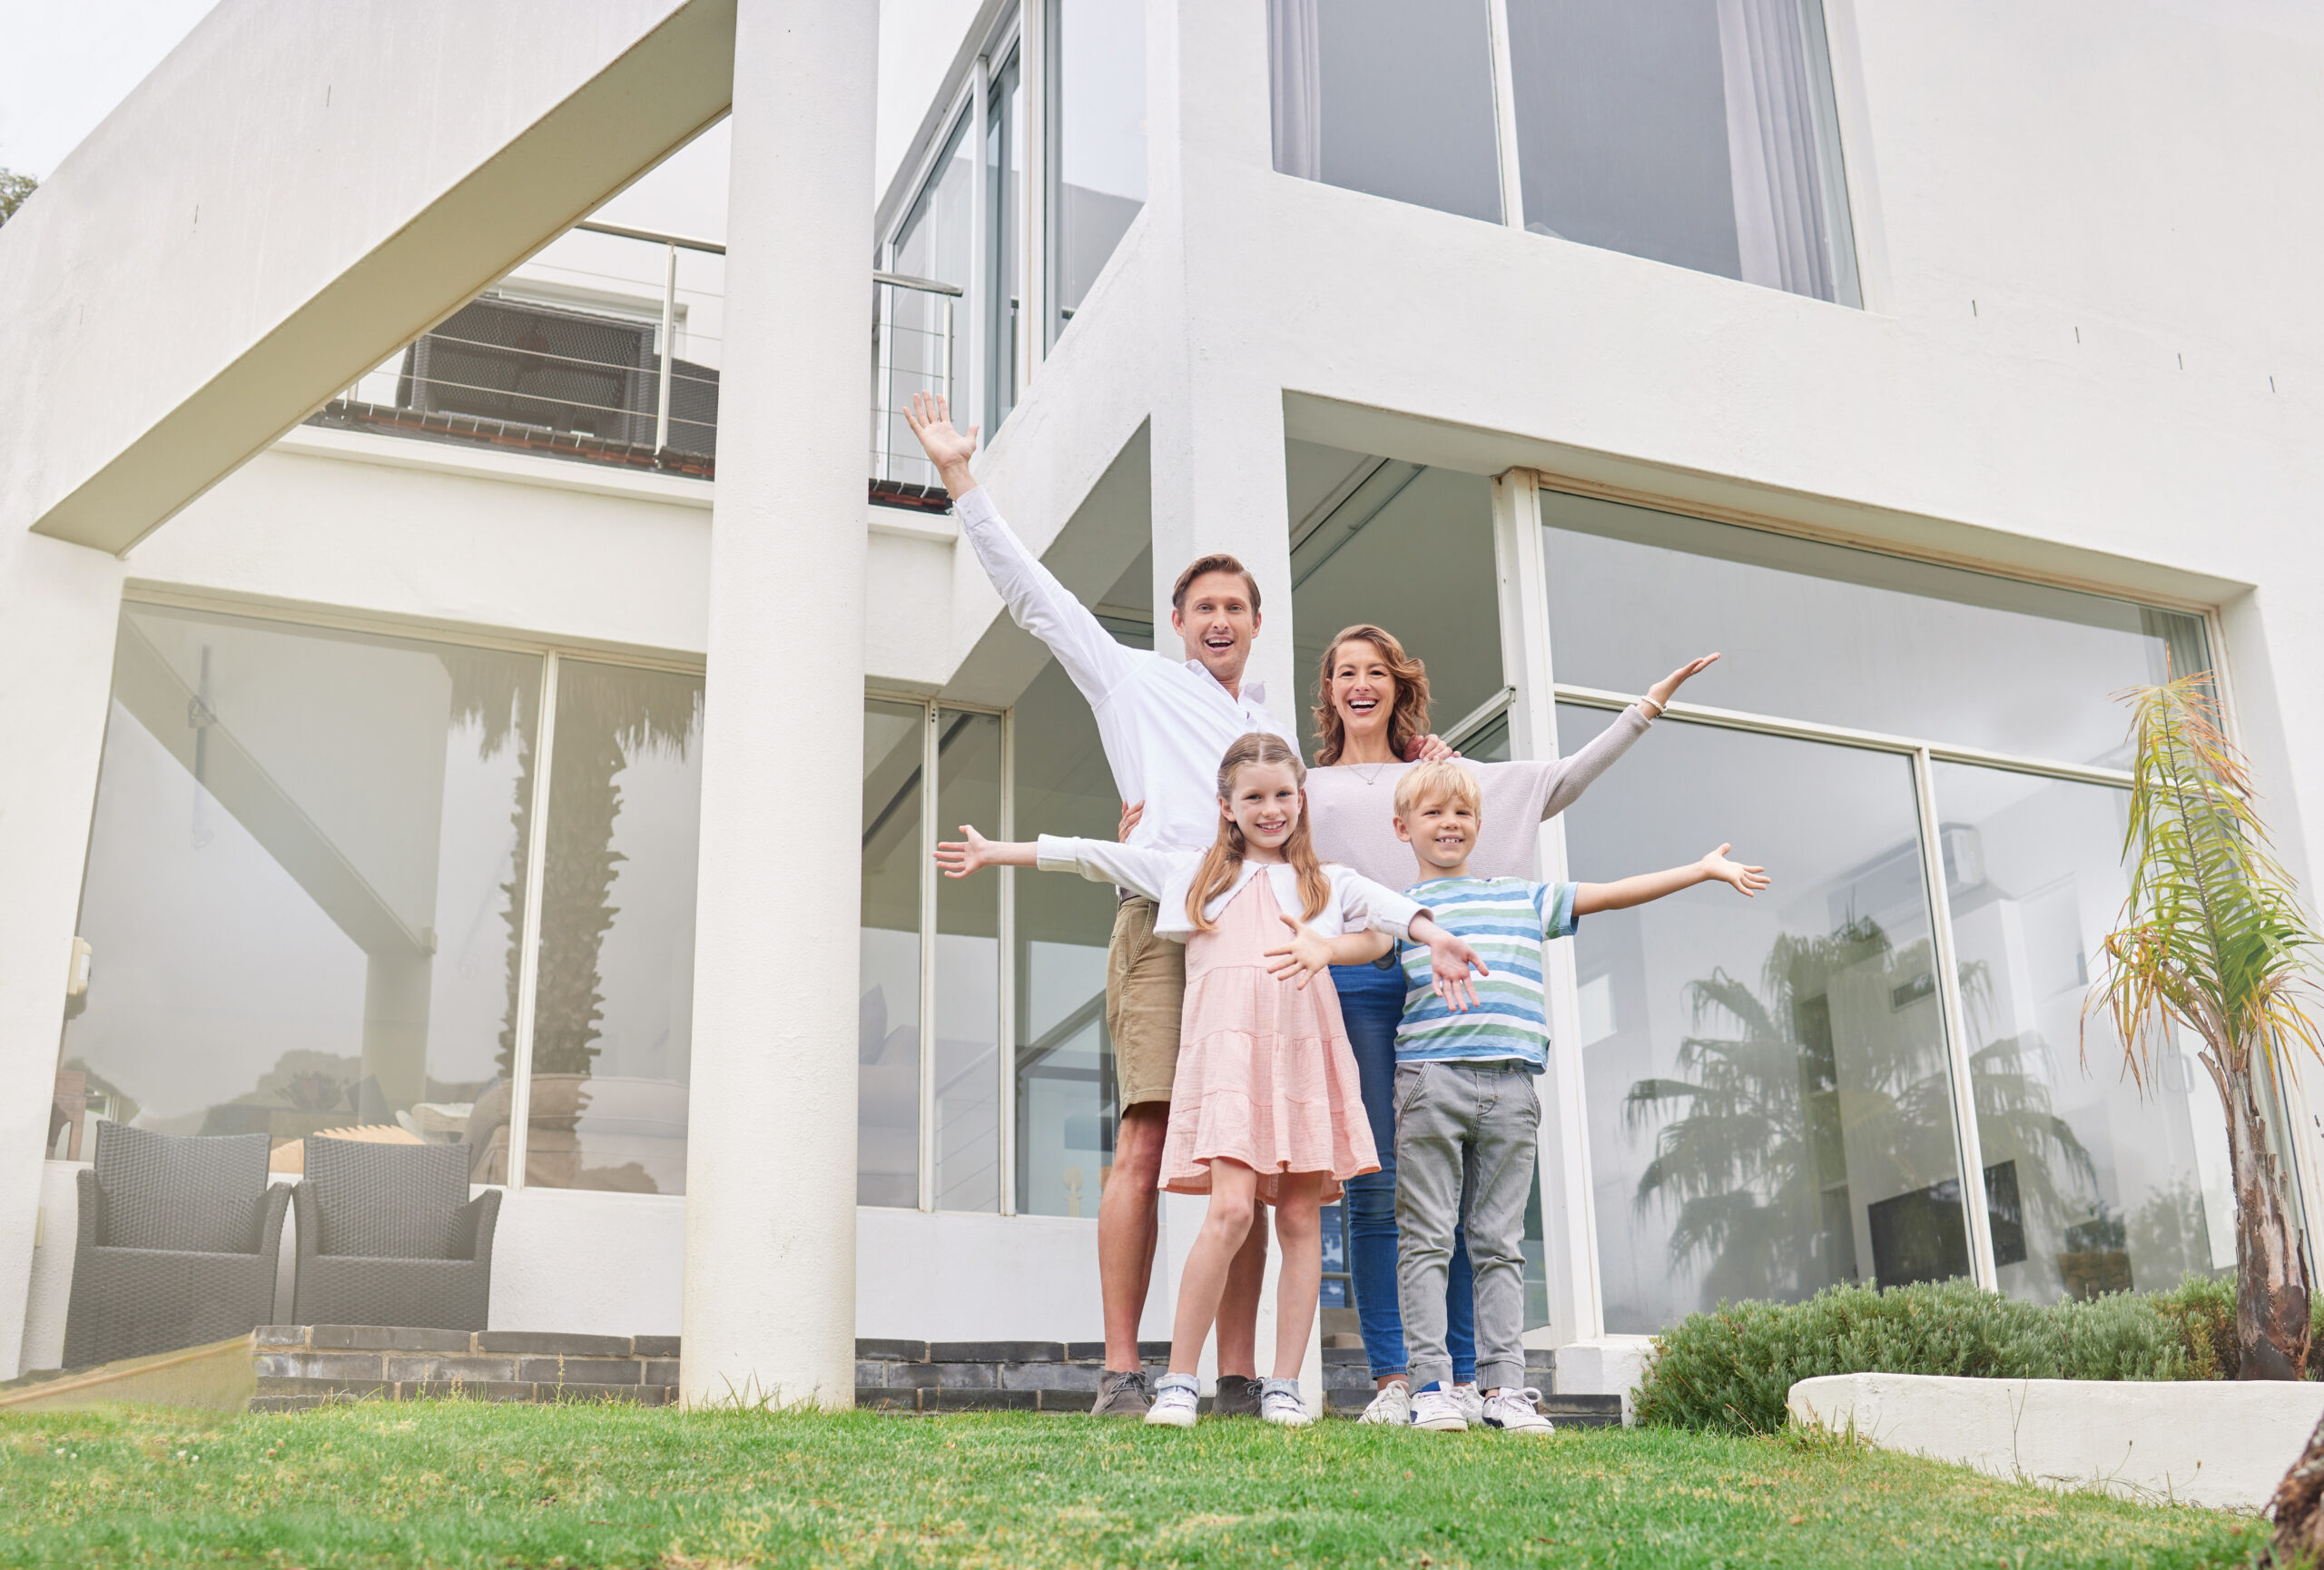 happy-family-home-investment-real-estate-people-that-celebrate-new-property-outdoor-man-realtor-mother-children-with-happiness-smile-love-house-with-excited-kids-parent